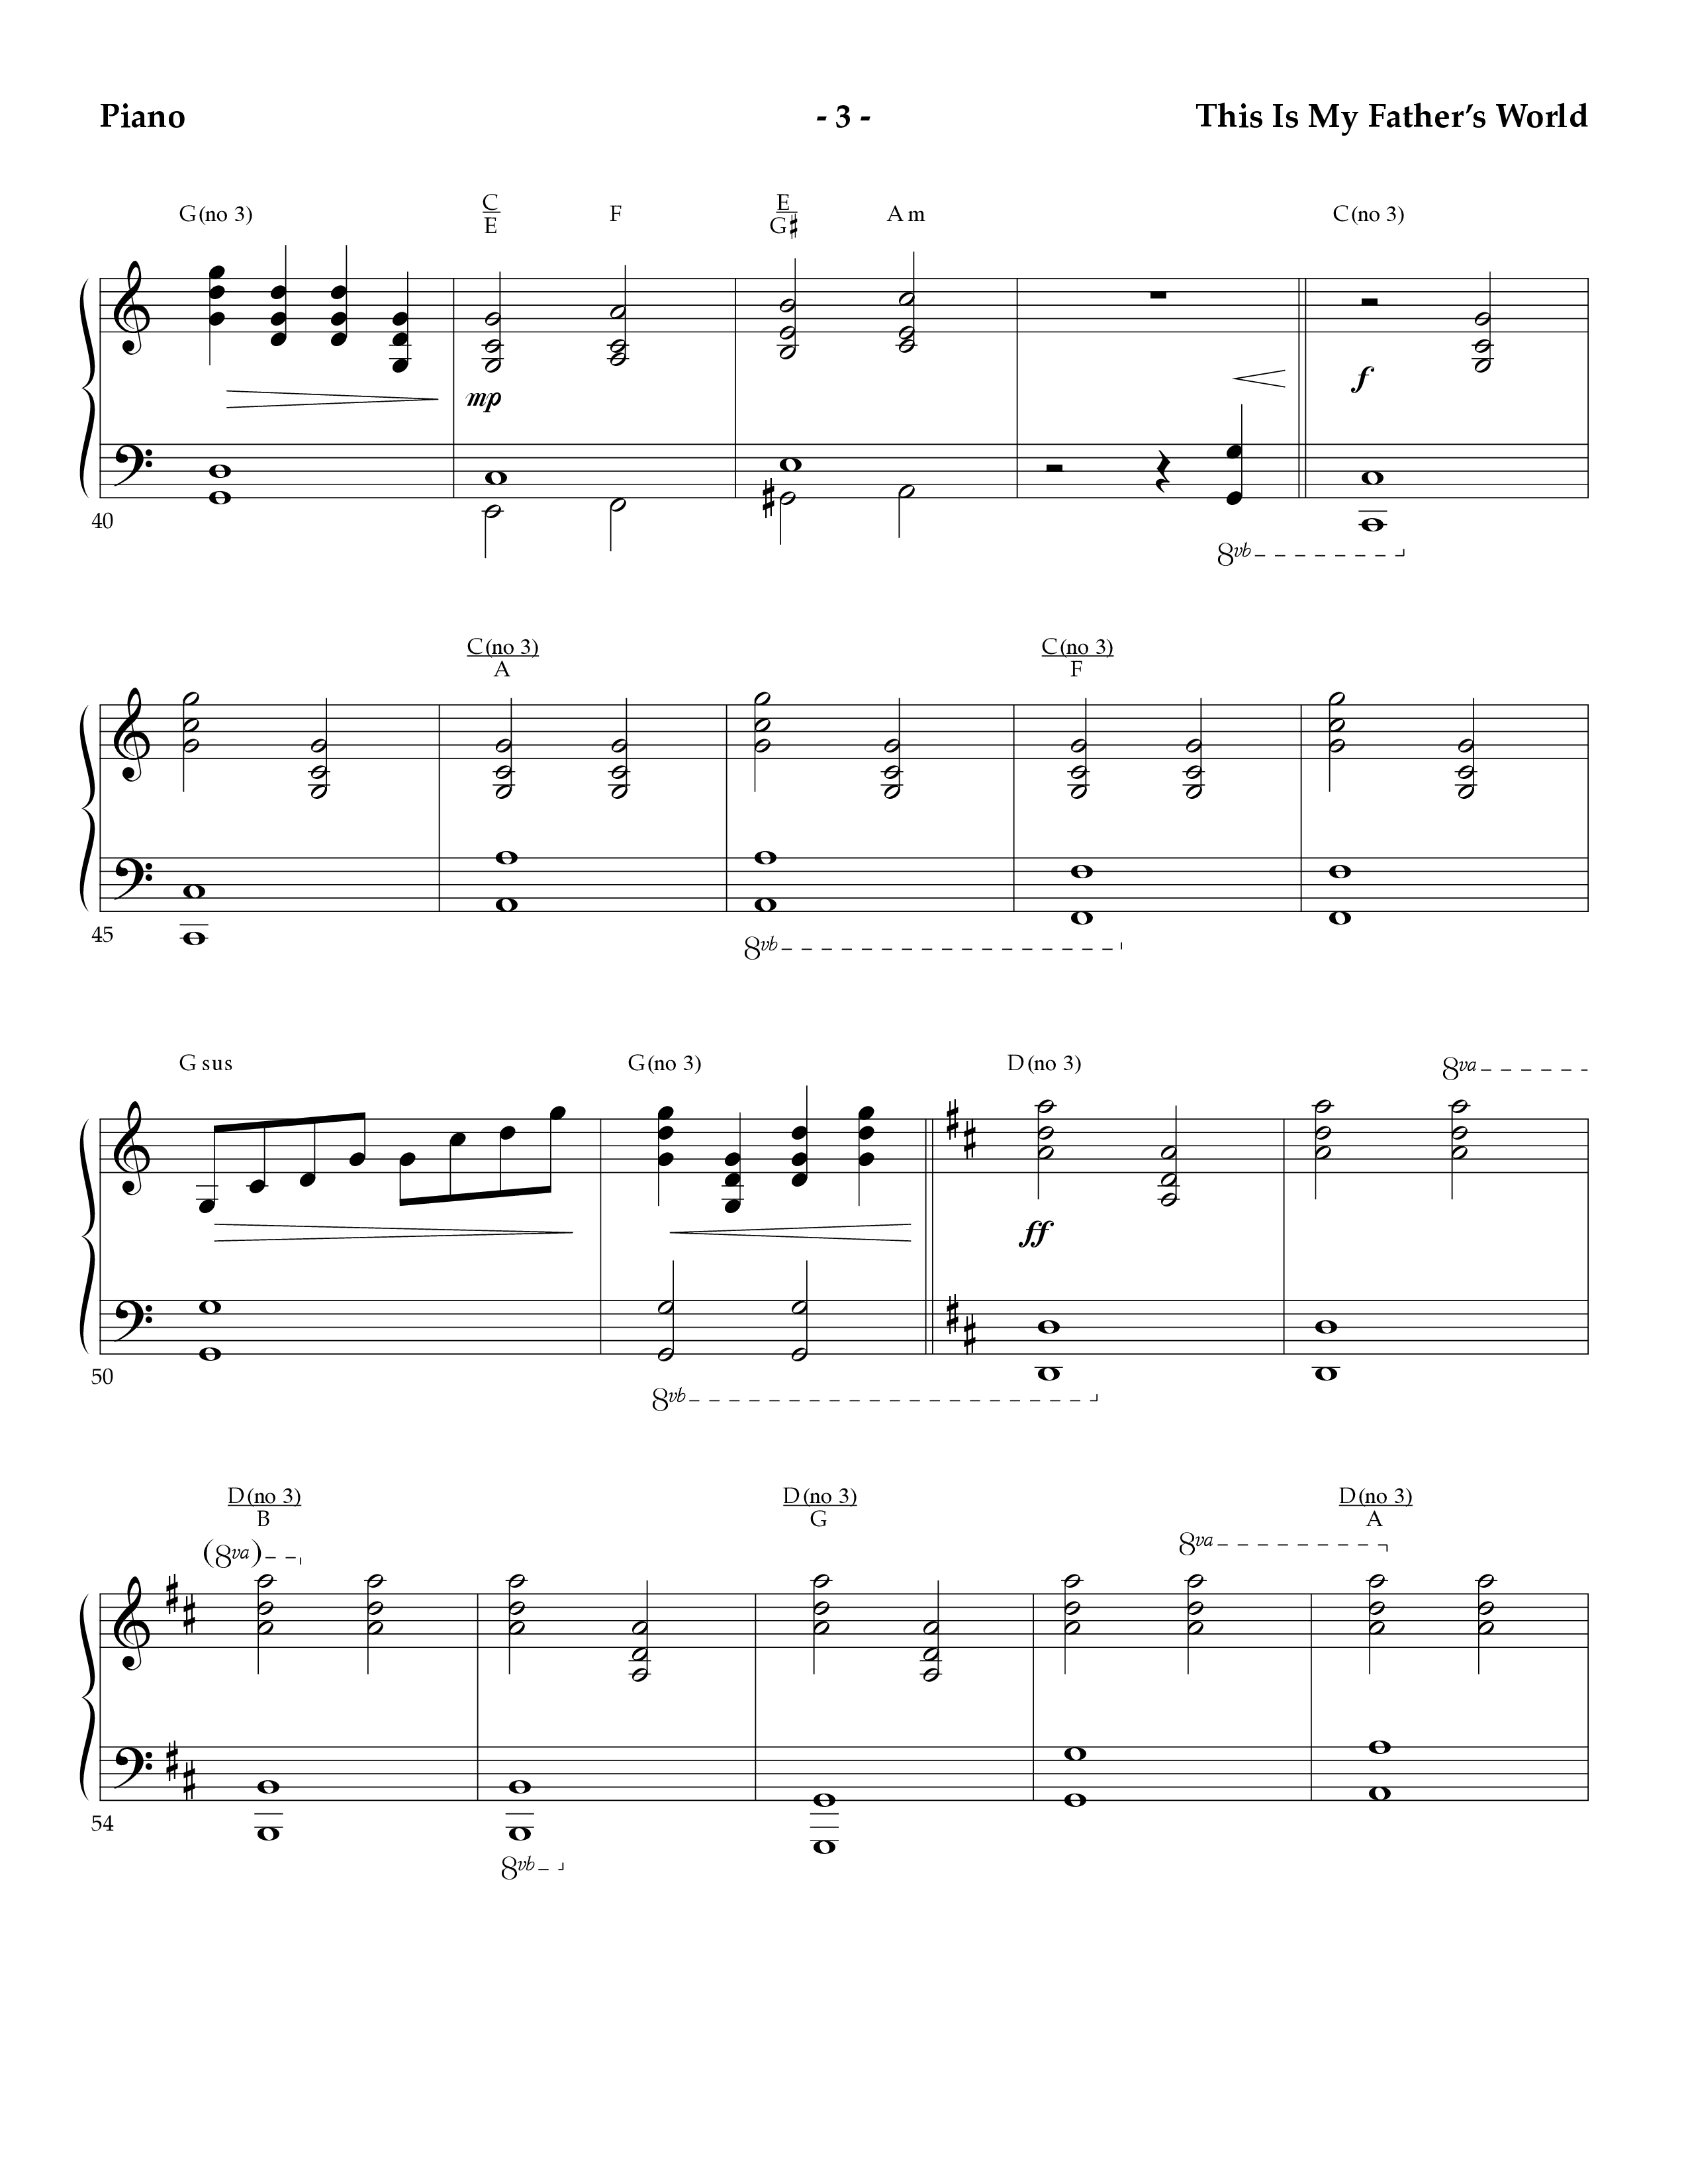 This Is My Father's World (Instrumental) Piano Sheet (Lifeway Worship / Arr. Mark Johnson)